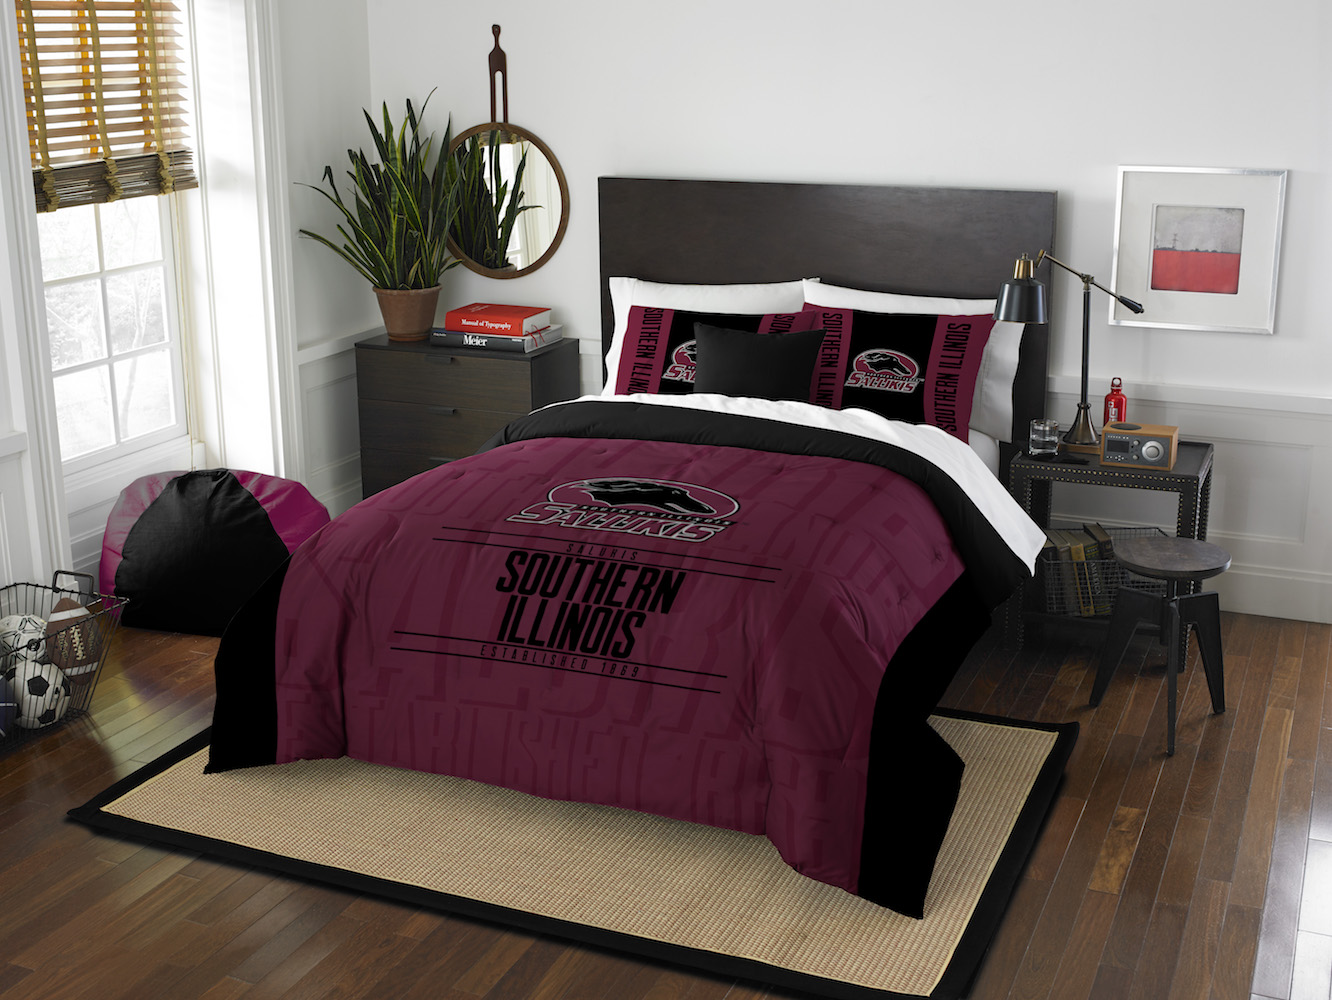 Southern Illinois Salukis QUEEN/FULL size Comforter and 2 Shams